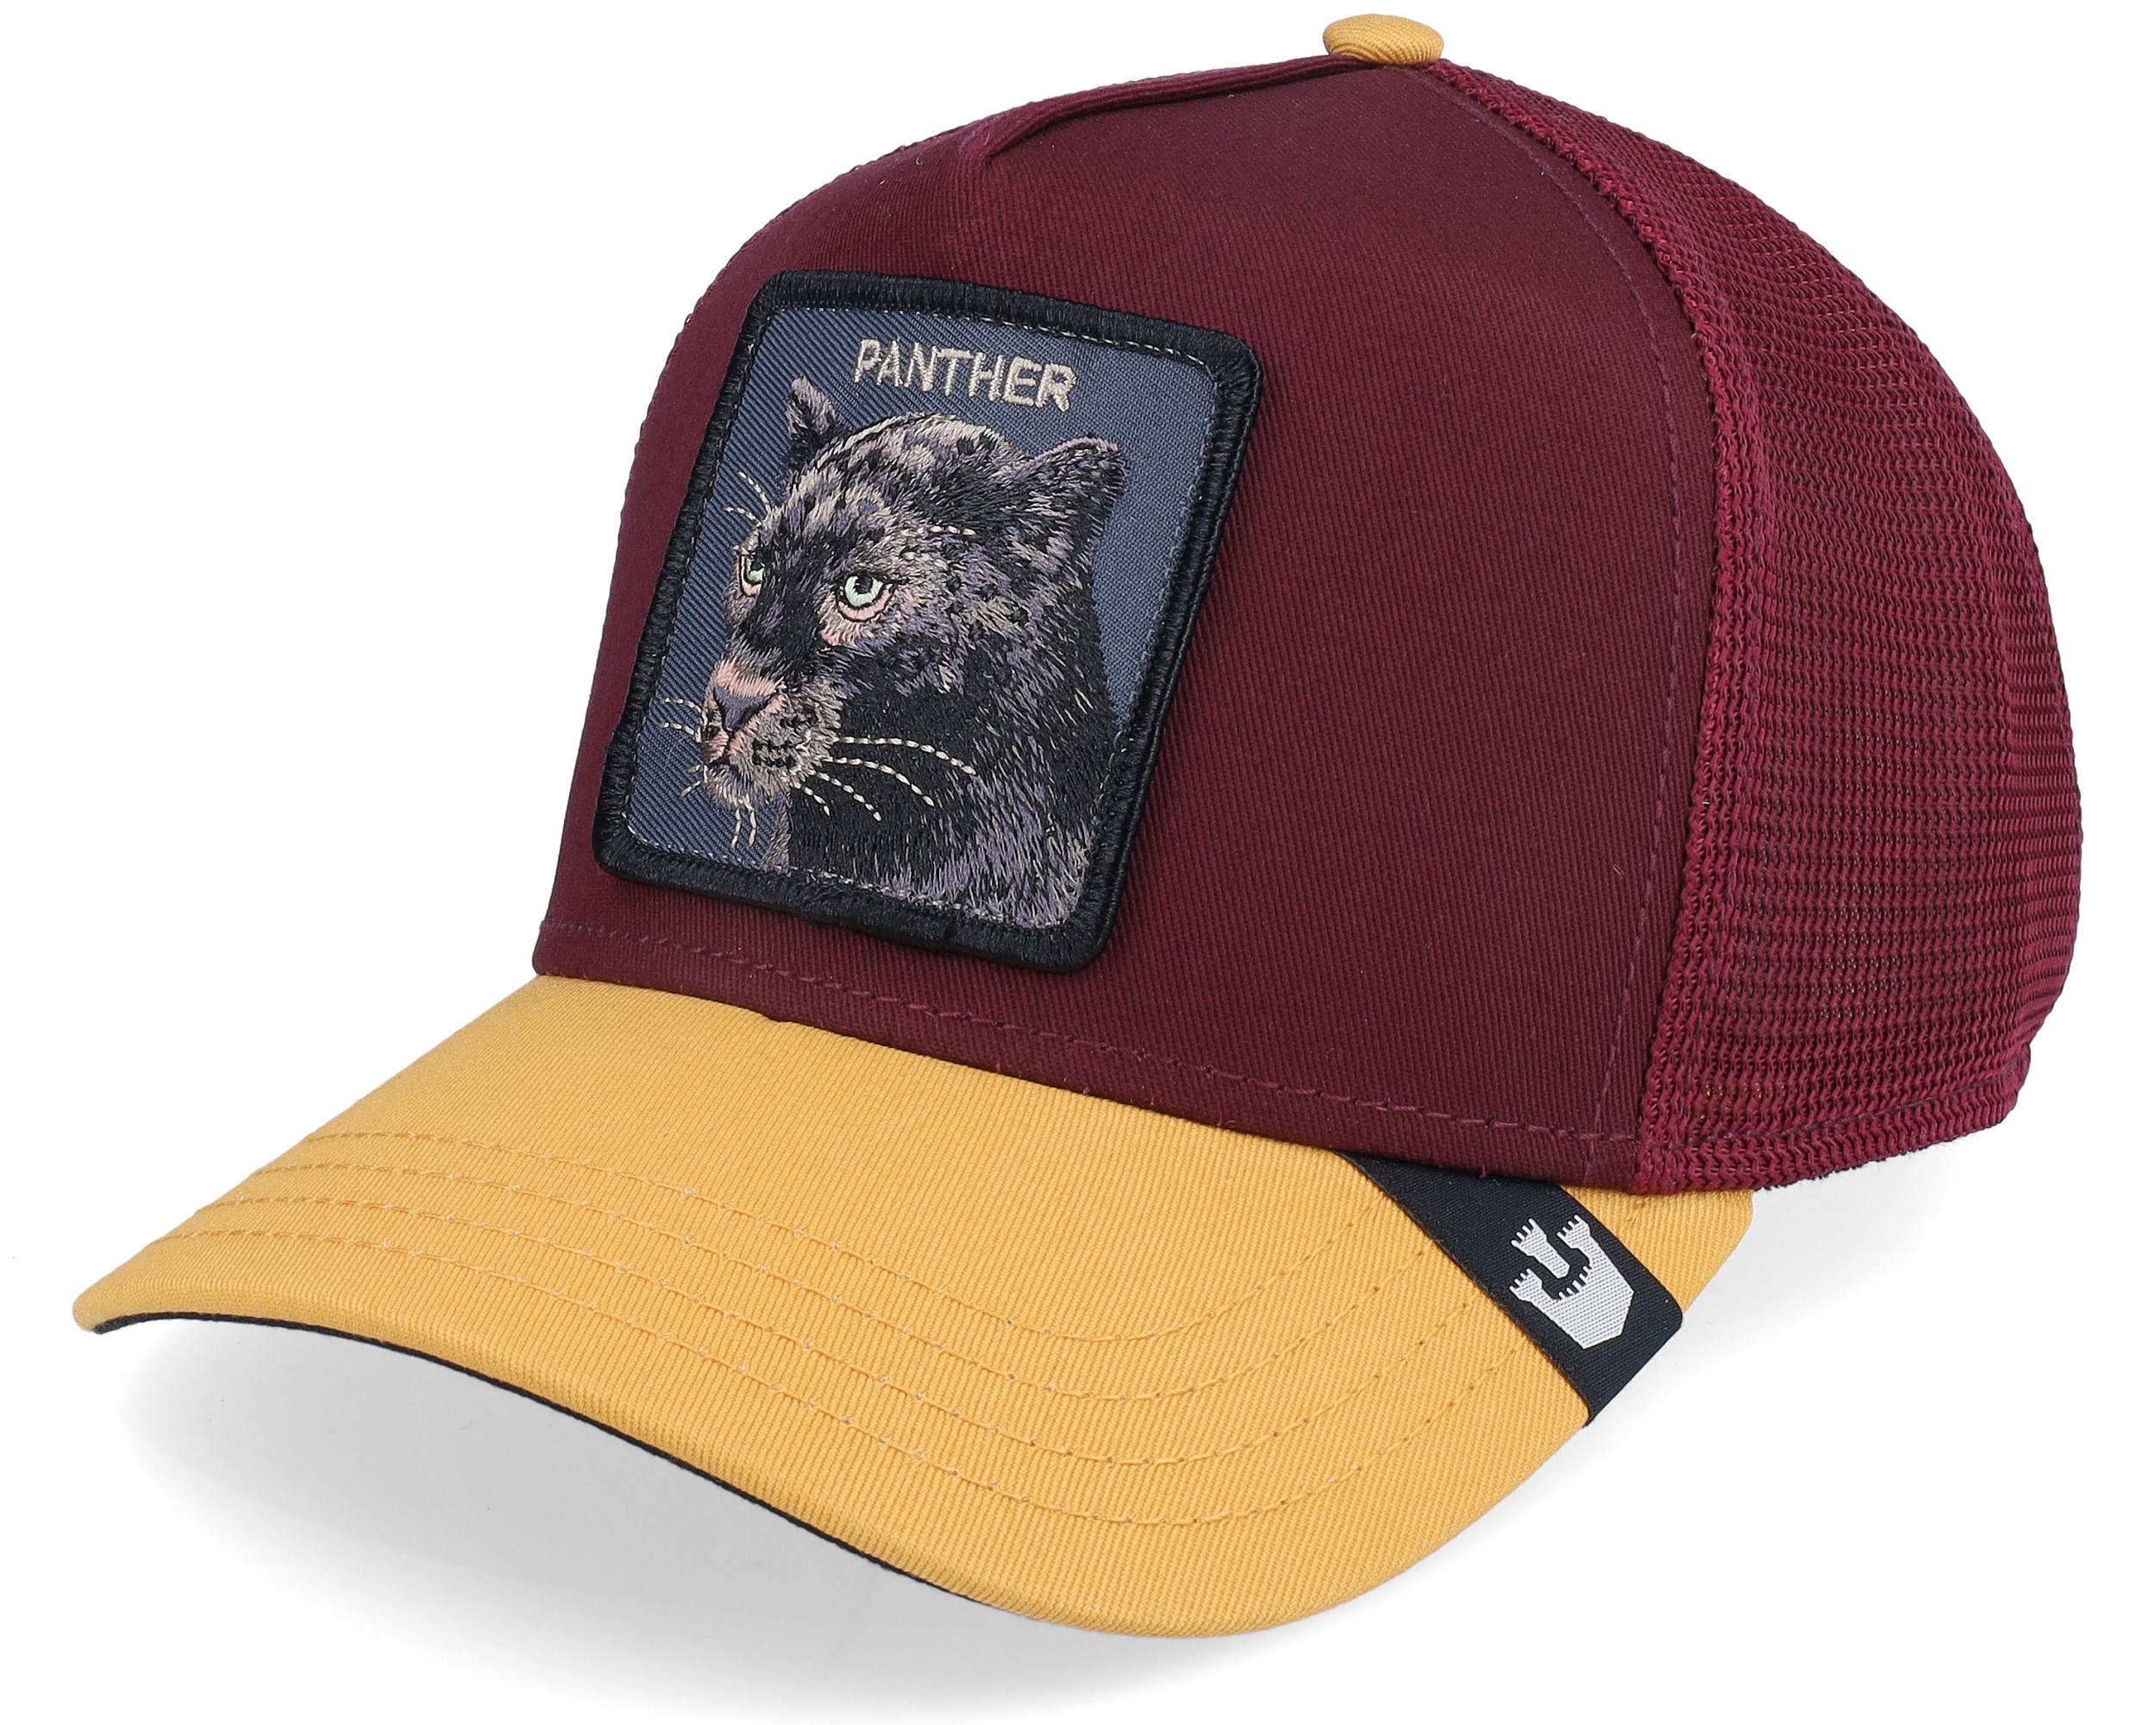 The Panther GOORIN BROS. Trucker Cap, Fast Shipping